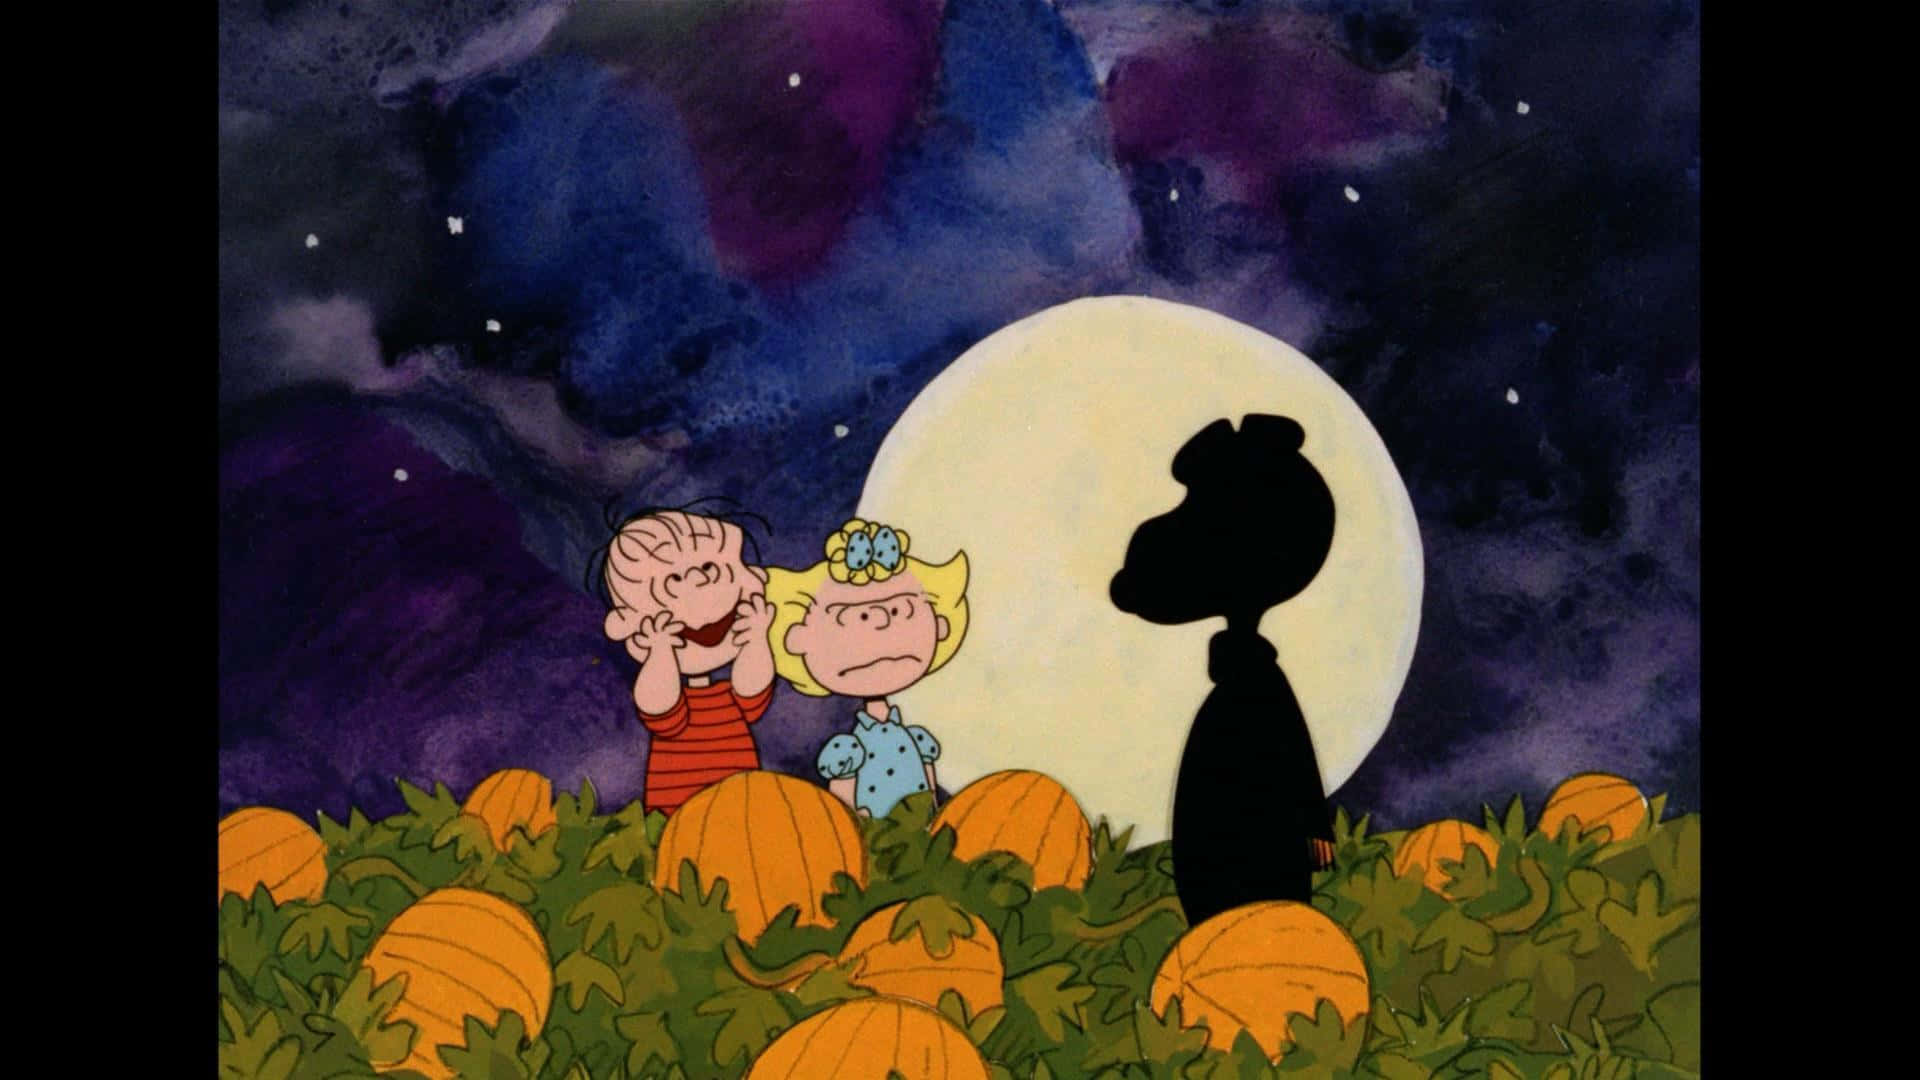 The Great Pumpkin rising during a haunting night Wallpaper